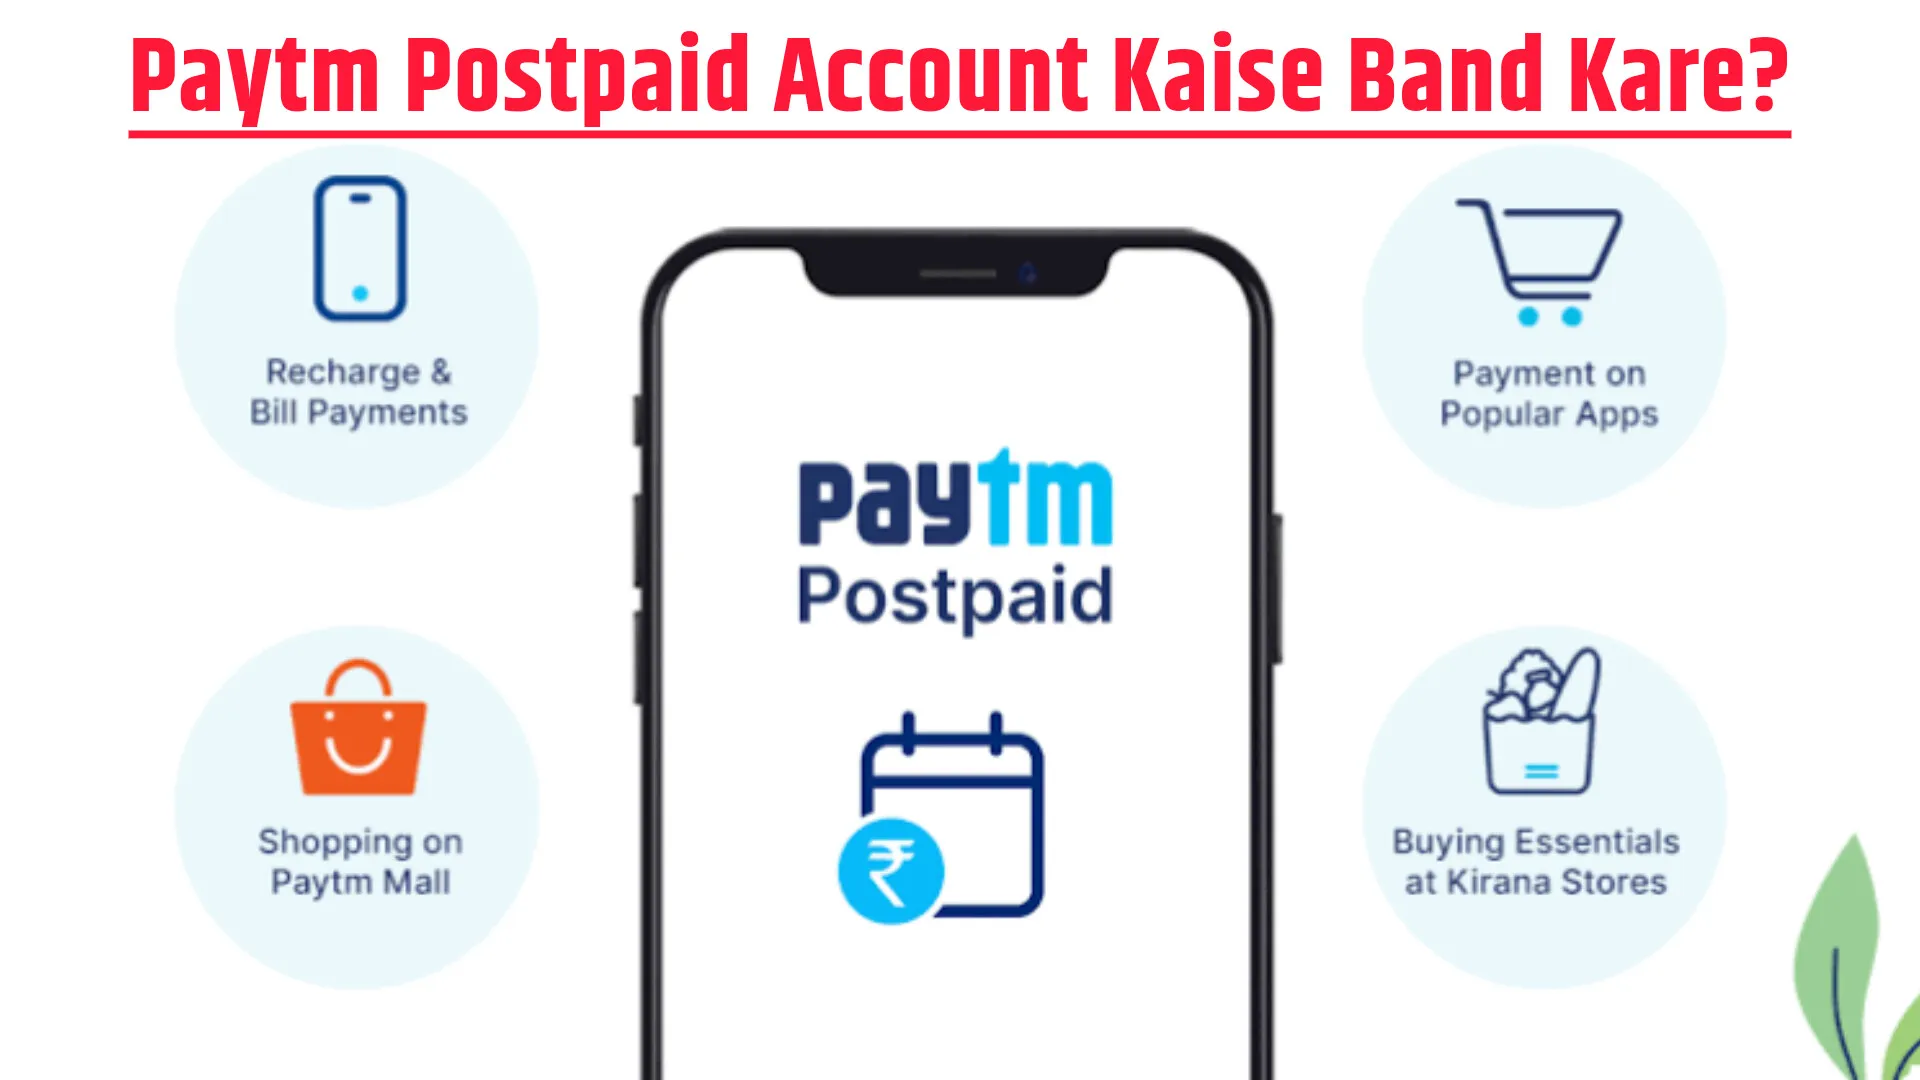 How to Stop Paytm Postpaid Account Permanently